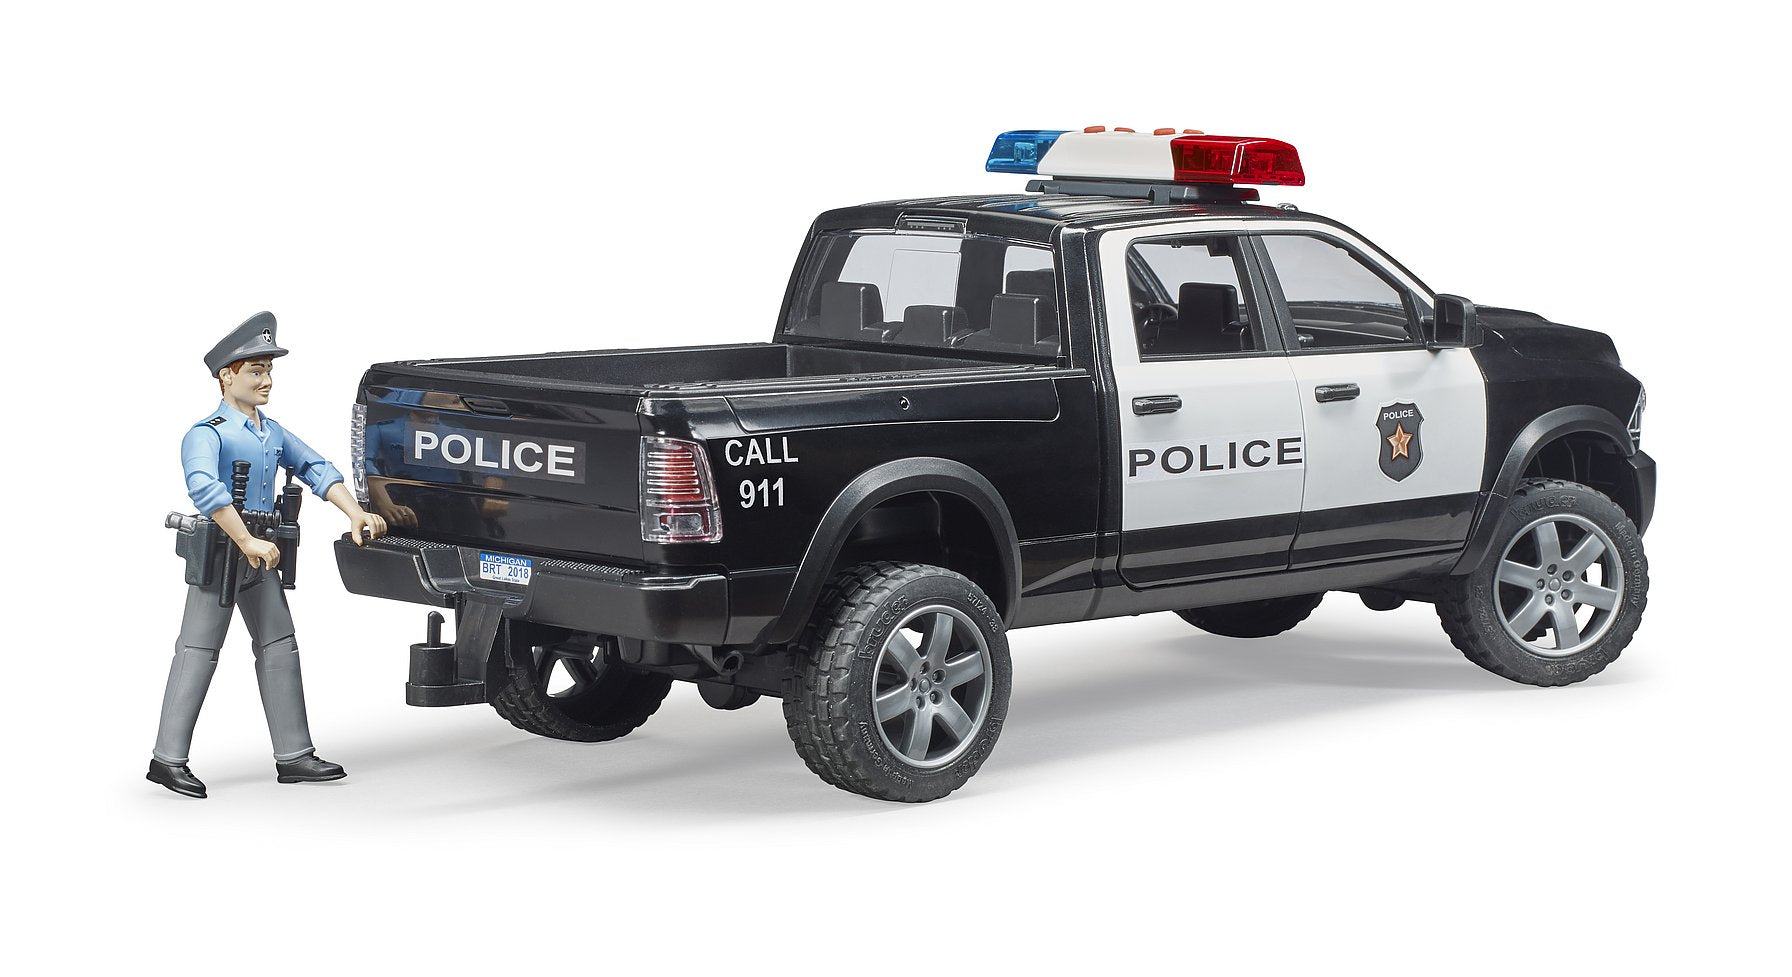 Police RAM 2500 Truck with Policeman